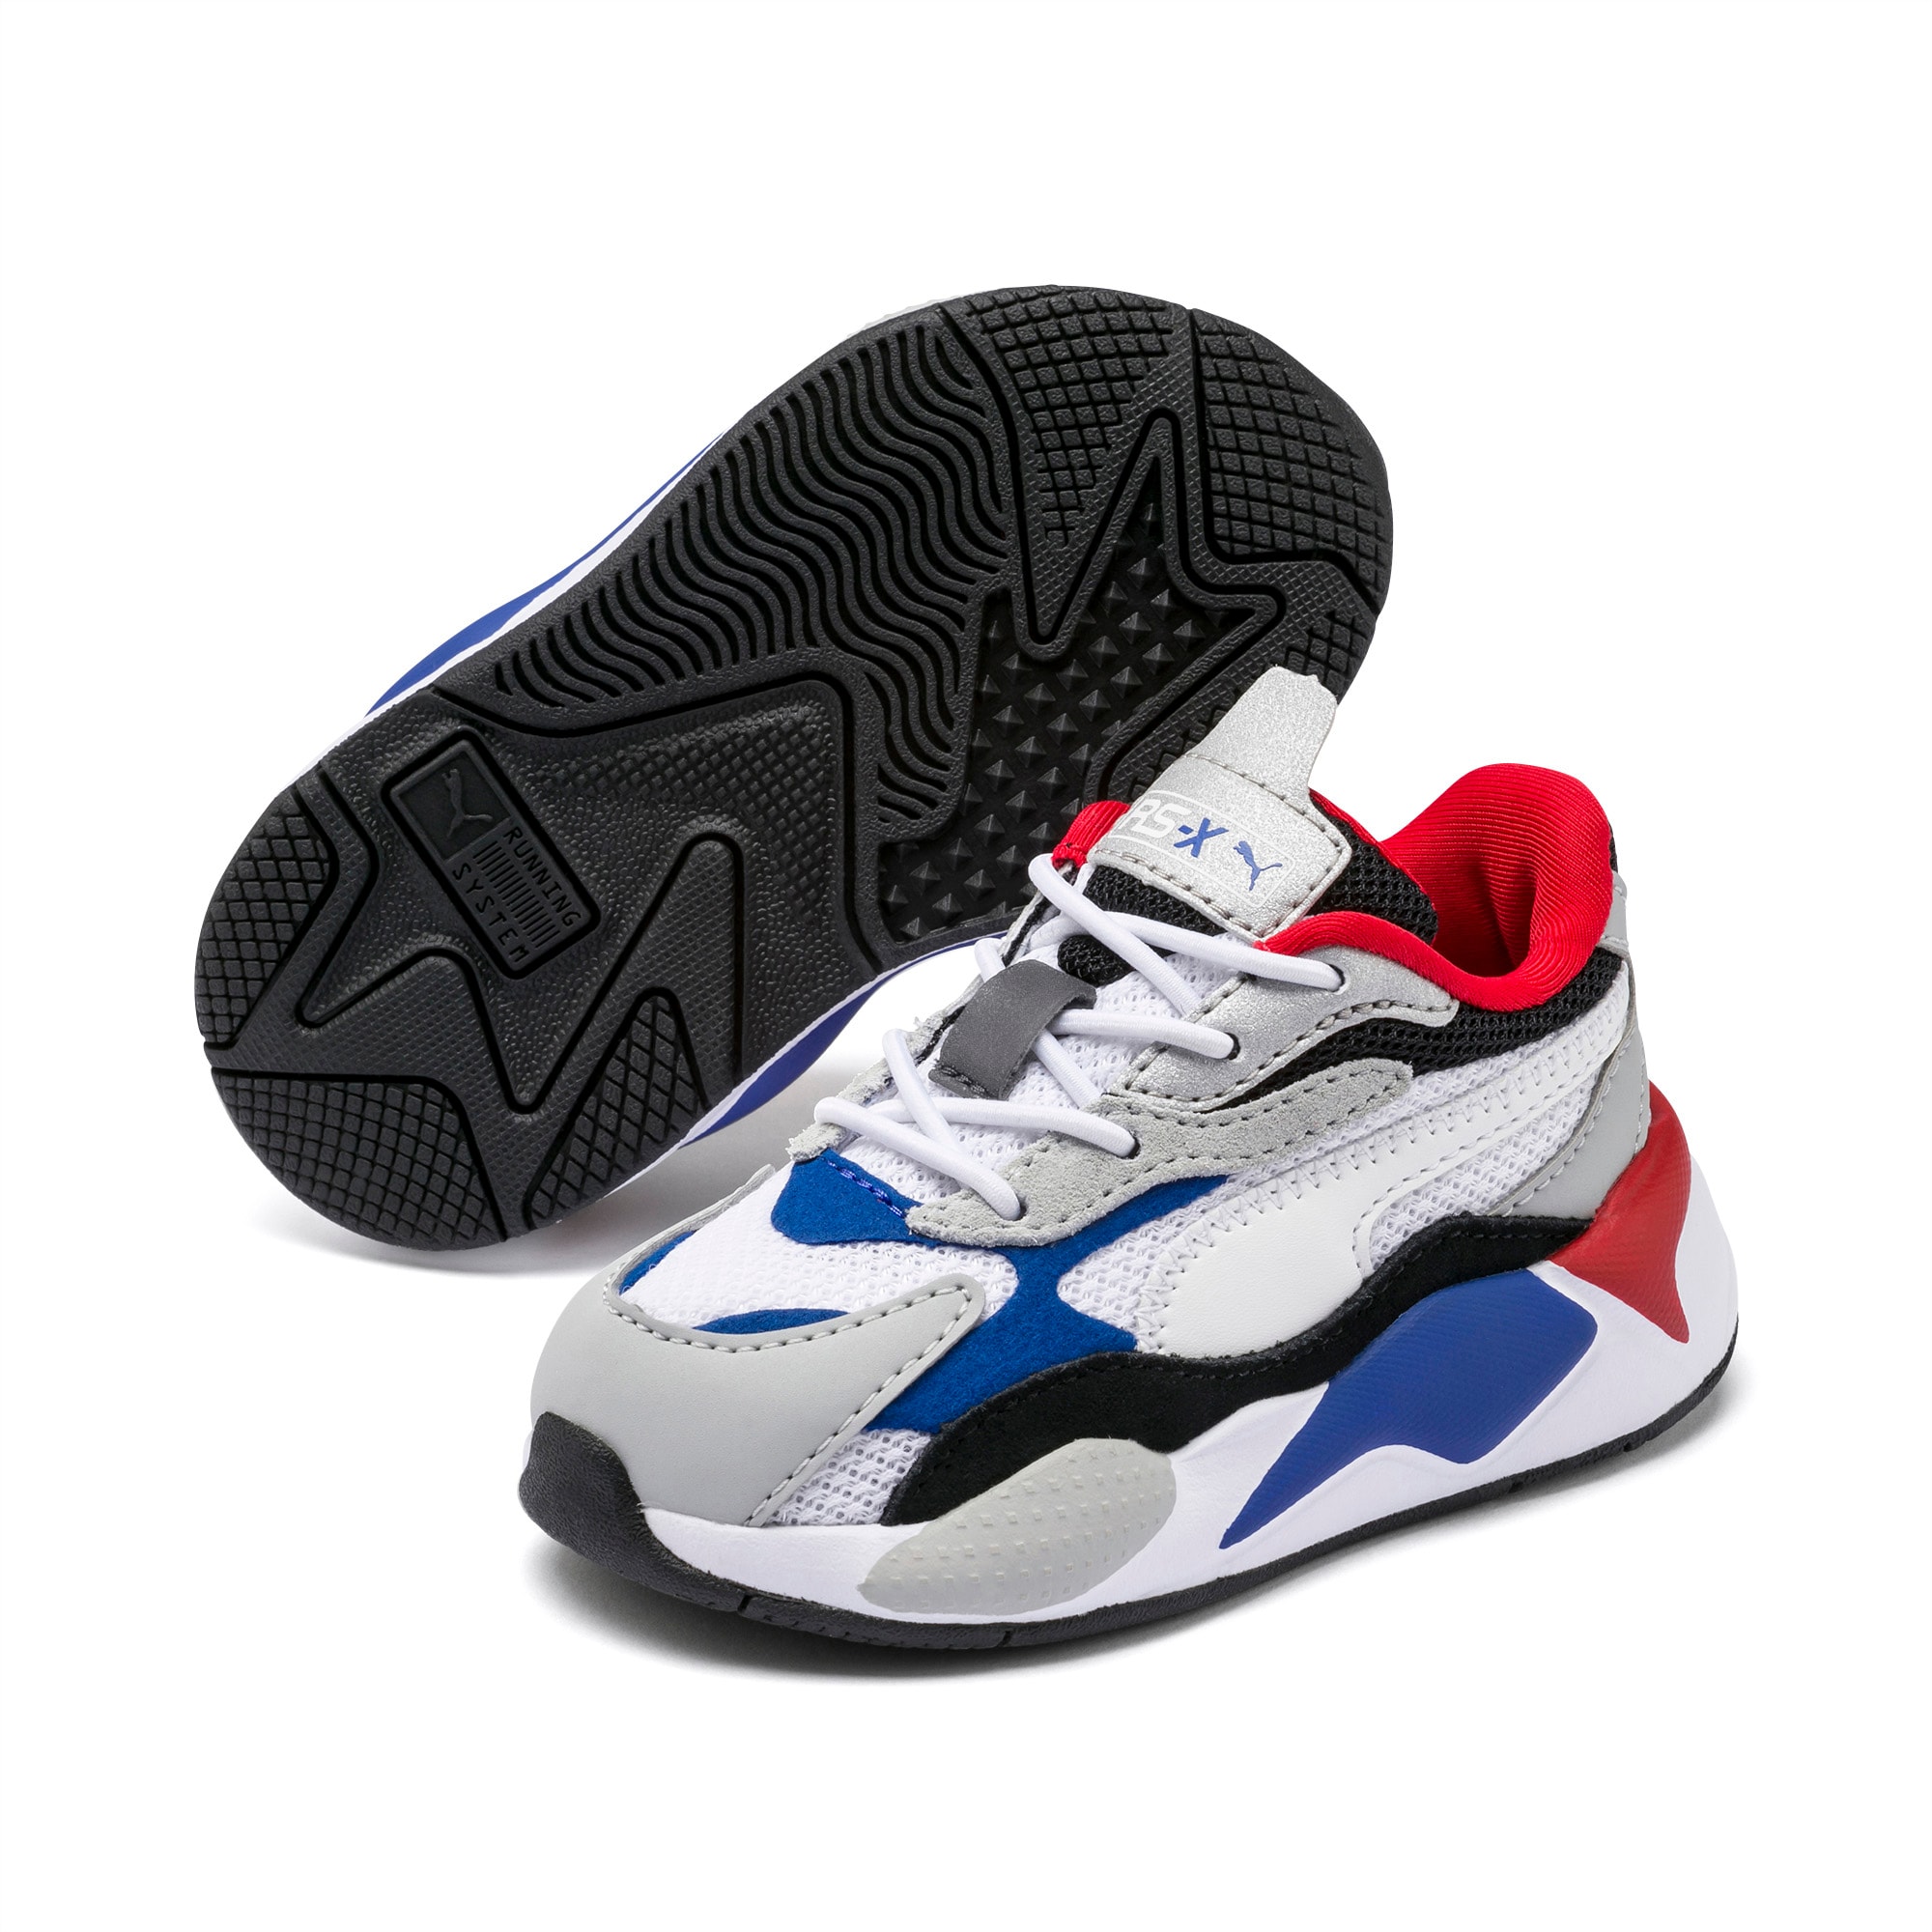 RS-X Puzzle AC Babies' Trainers | Puma 